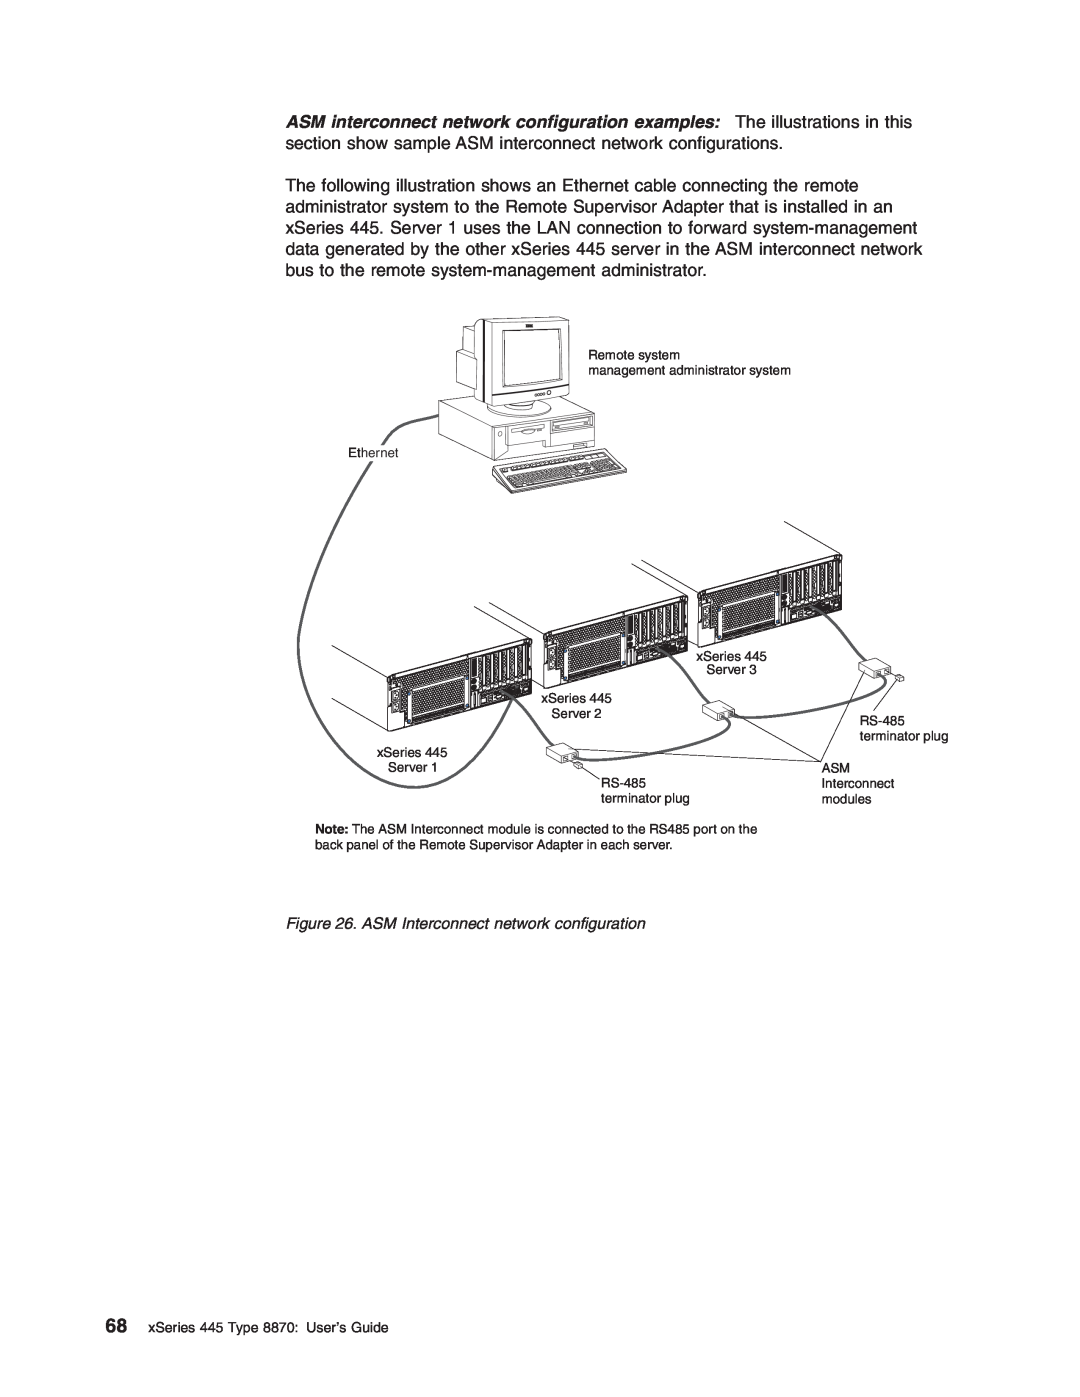 IBM manual ASM Interconnect network configuration, xSeries 445 Type 8870 User’s Guide 